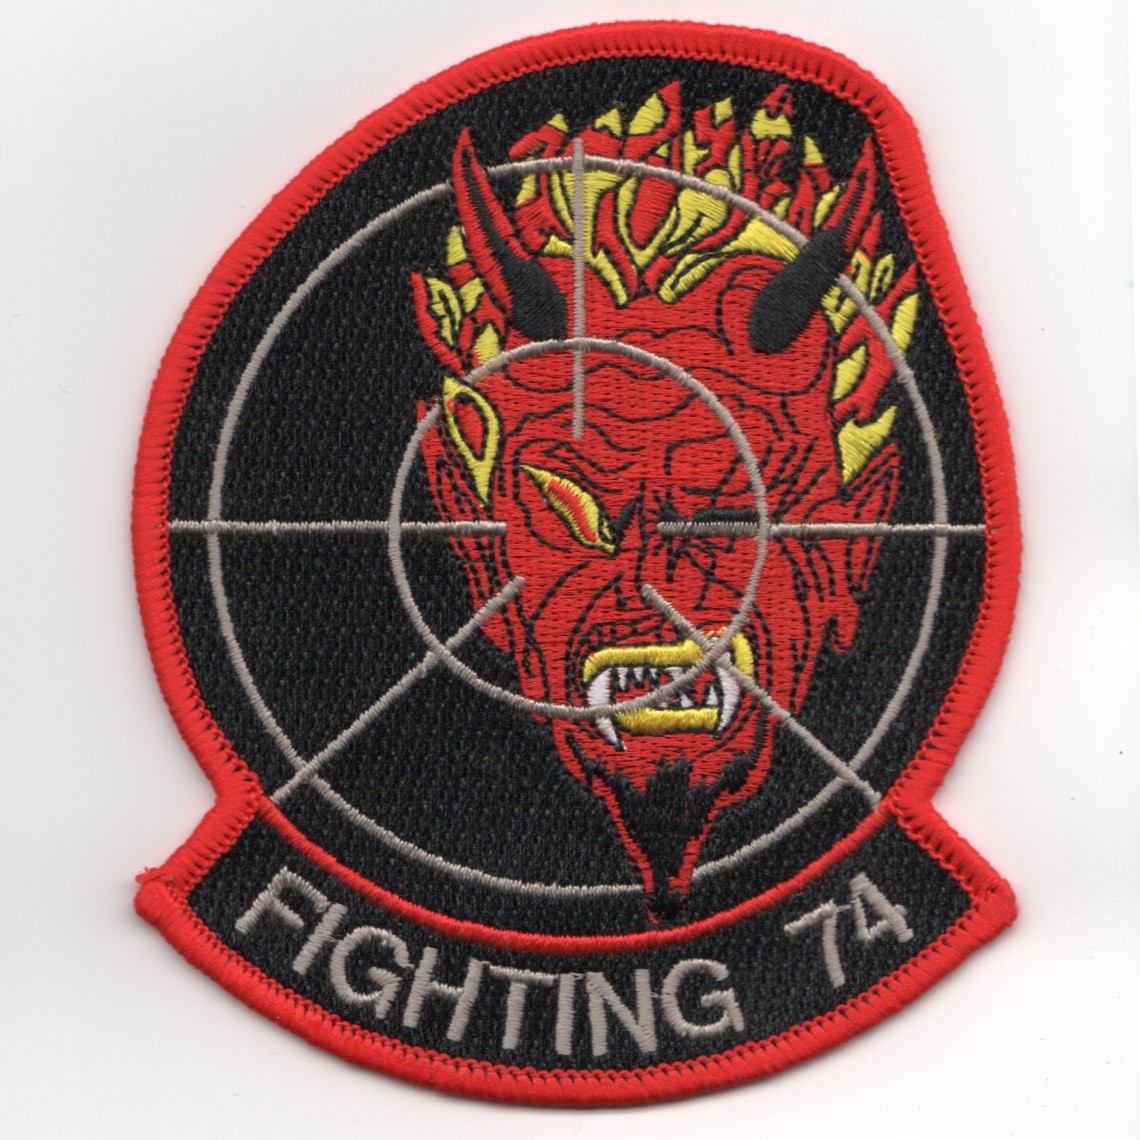 VF-74 'RED AIR' Squadron Patch